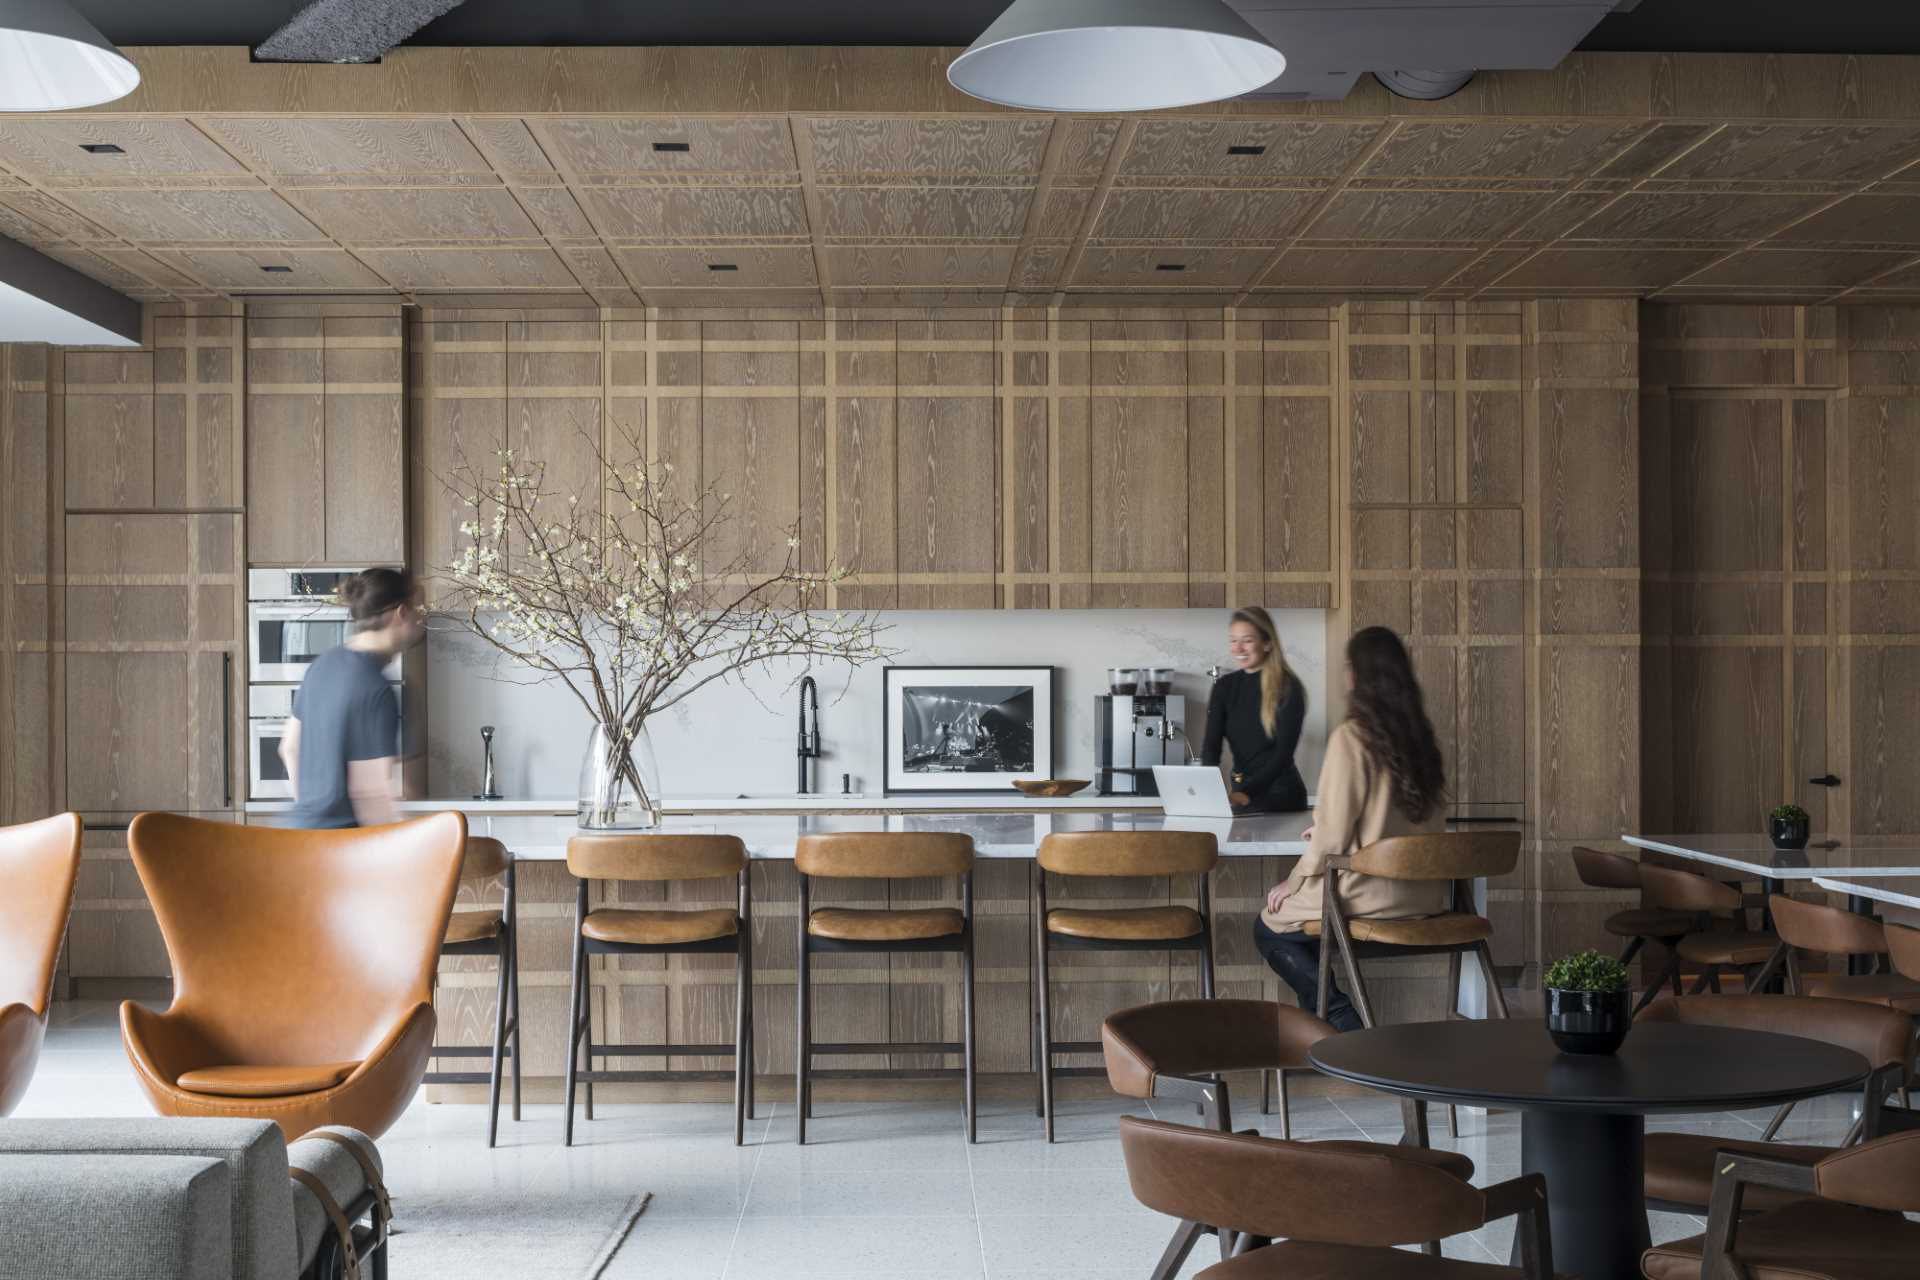 This plaid-inspired wood-clad kitchen was conceived as a pochéd white oak bookend, with wood covering all cabinets, appliances, doors, and the island.